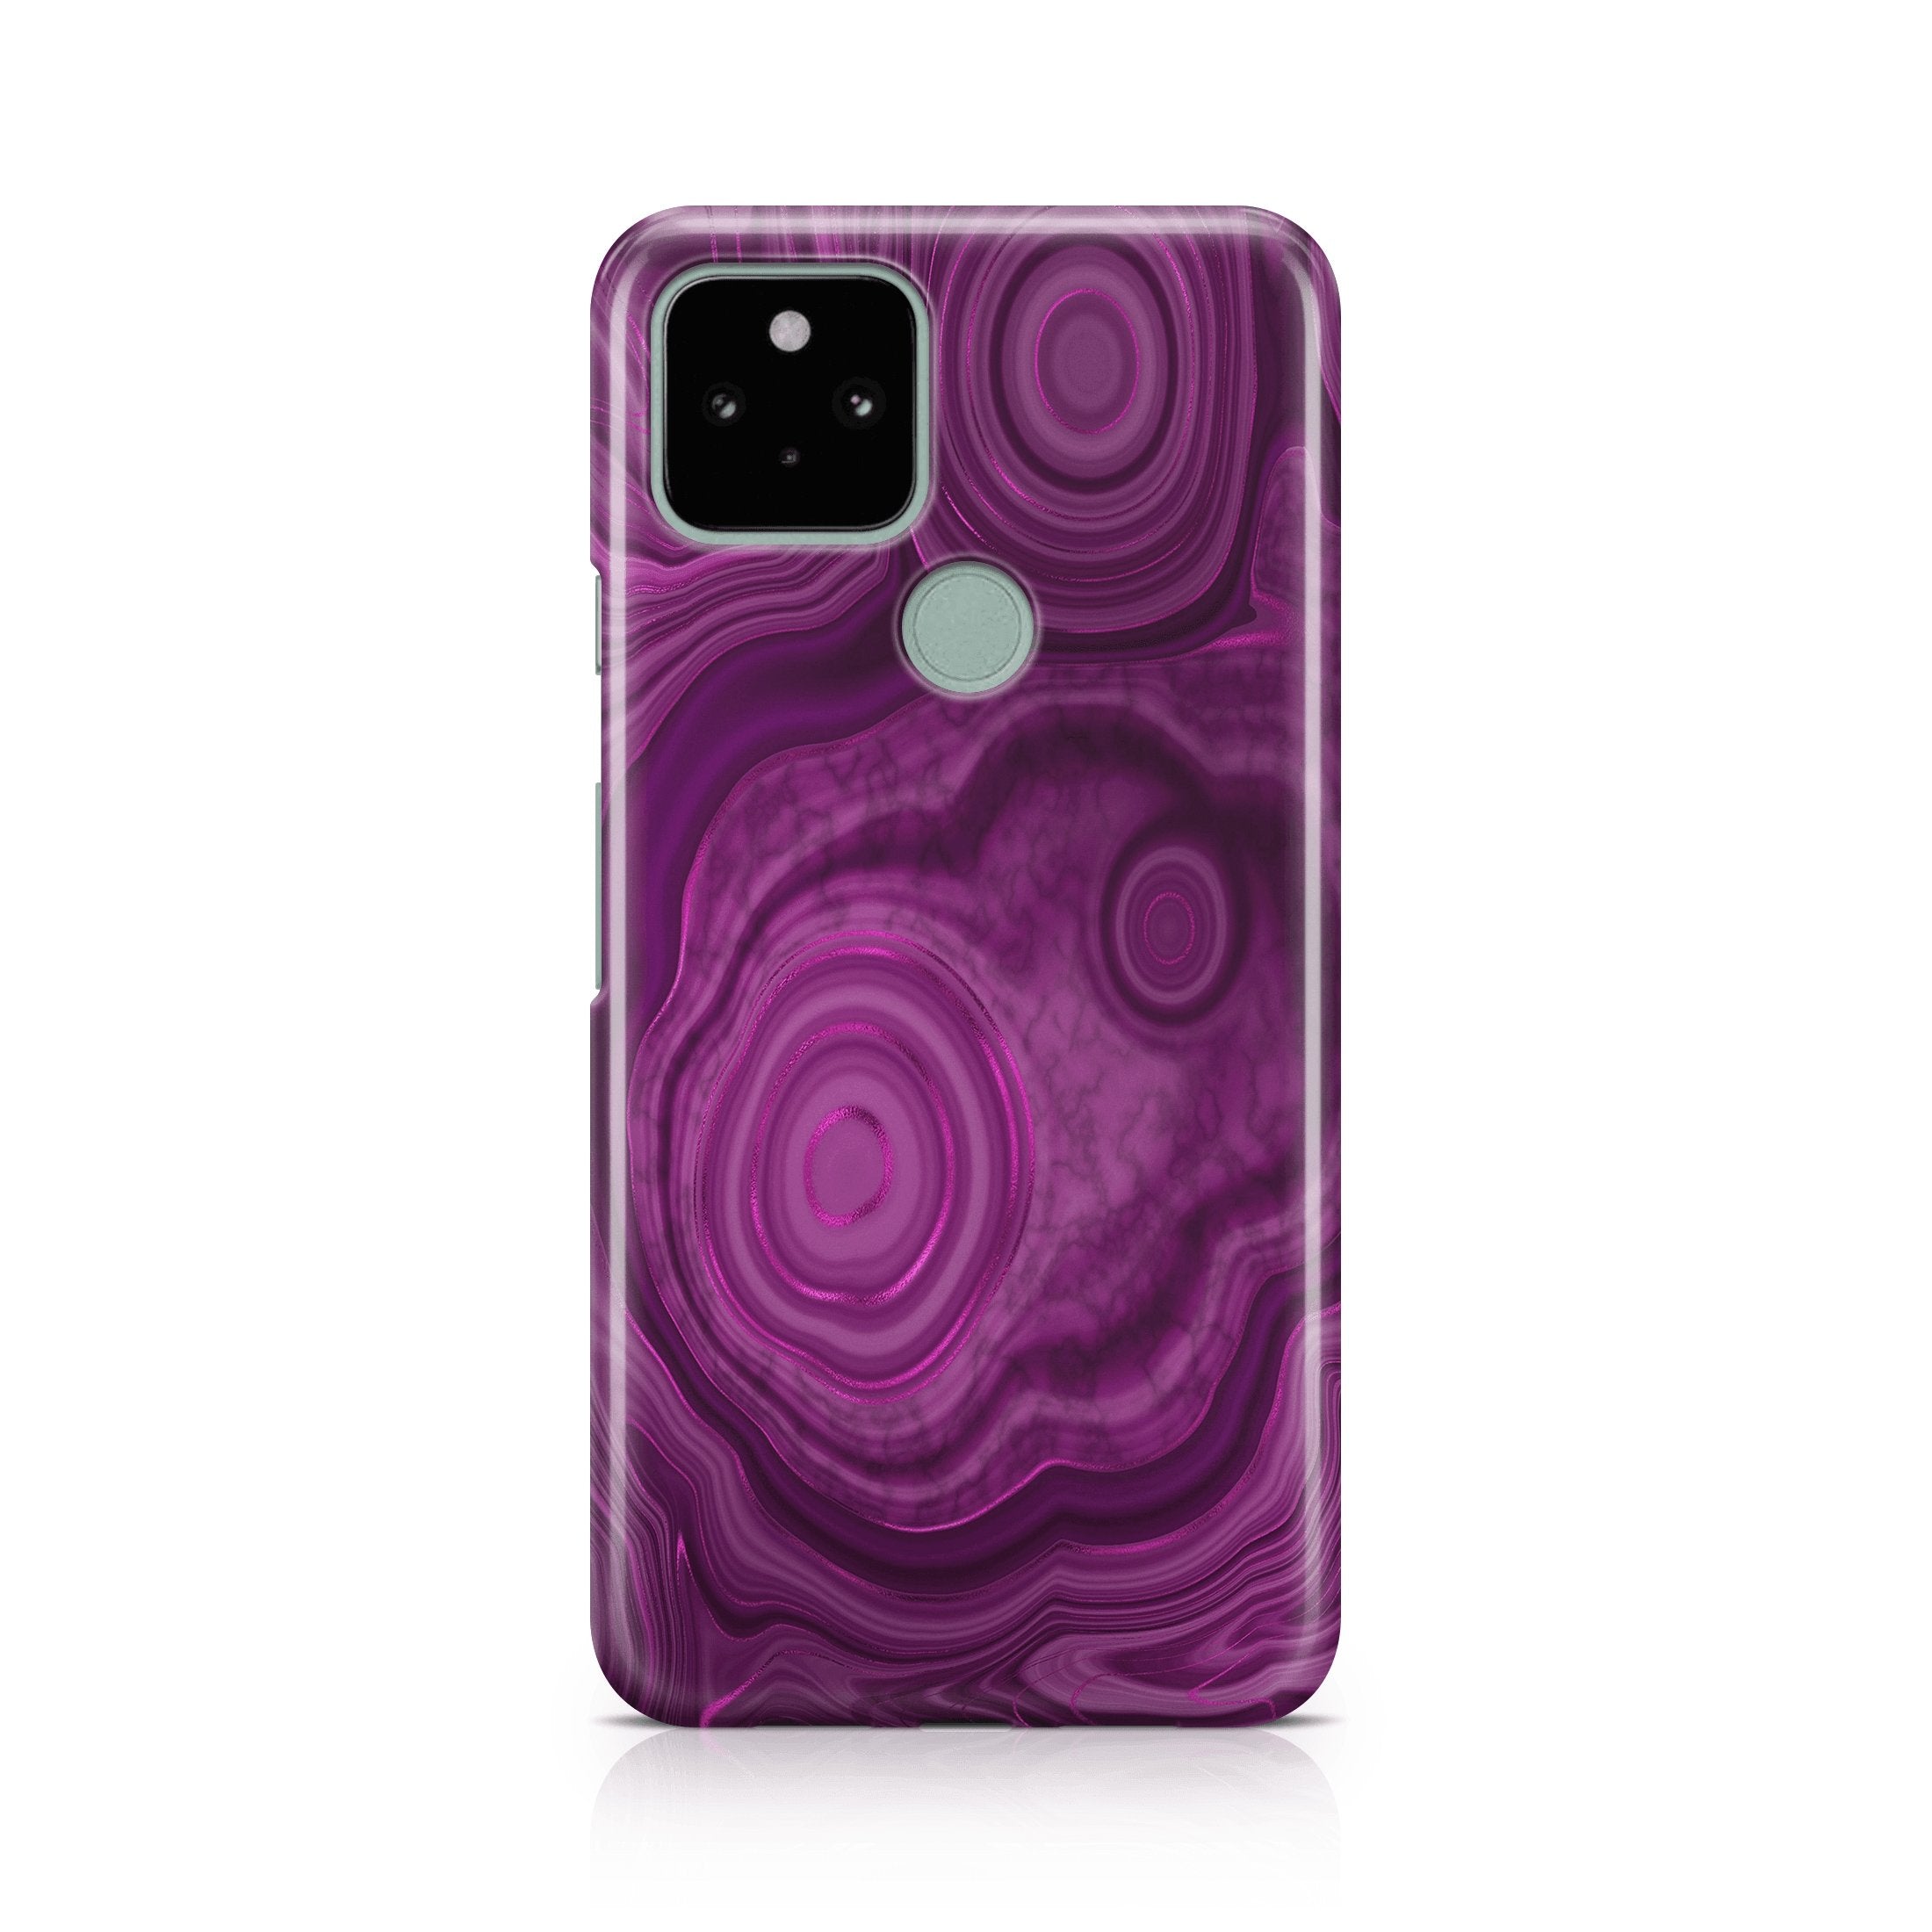 Amethyst Strata IV - Google phone case designs by CaseSwagger